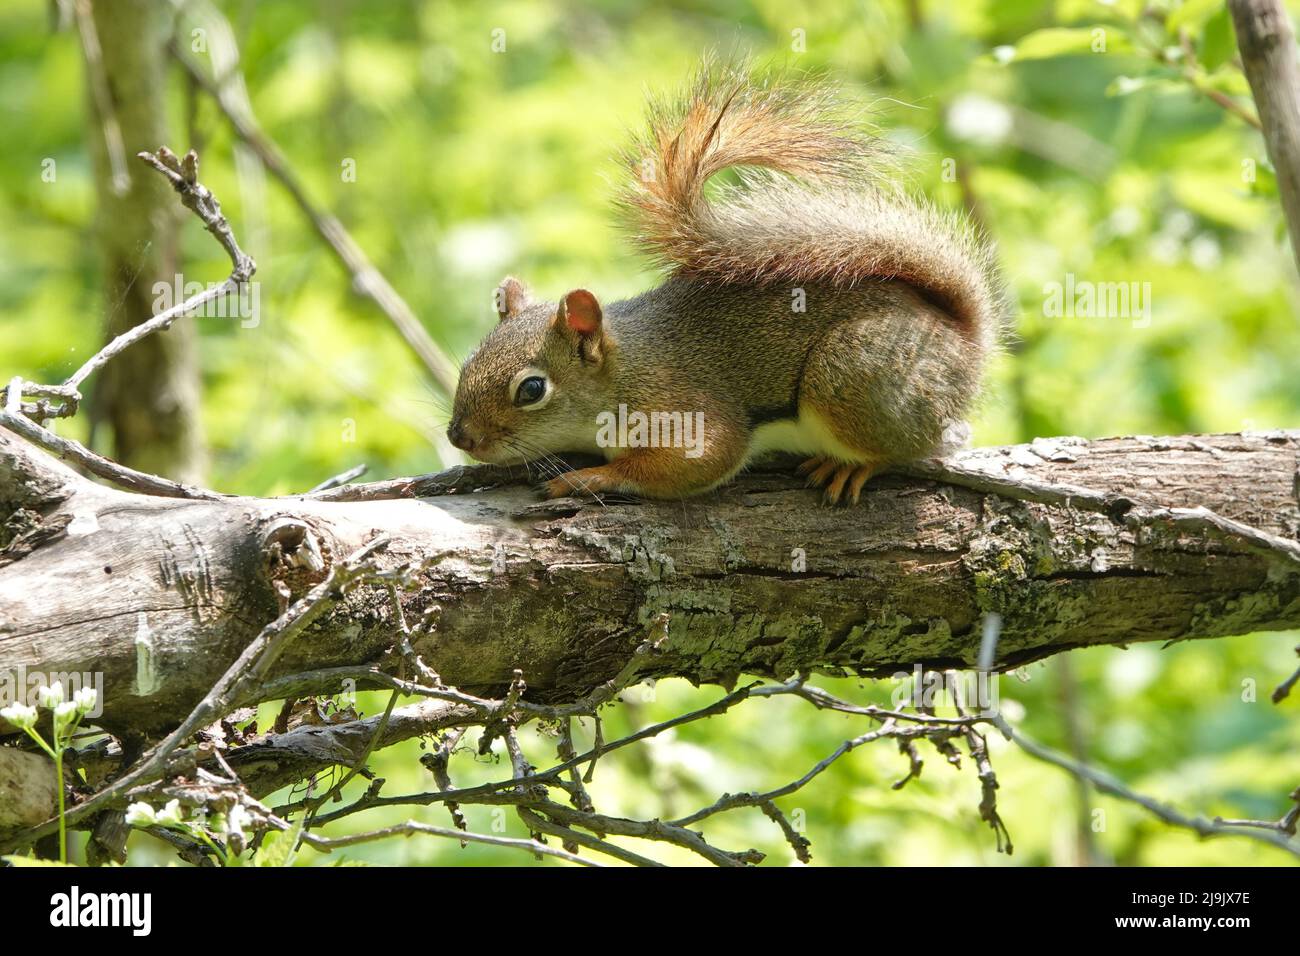 American red squirrel (Tamiasciurus hudsonicus) on a tree branch in Indiana, USA Stock Photo